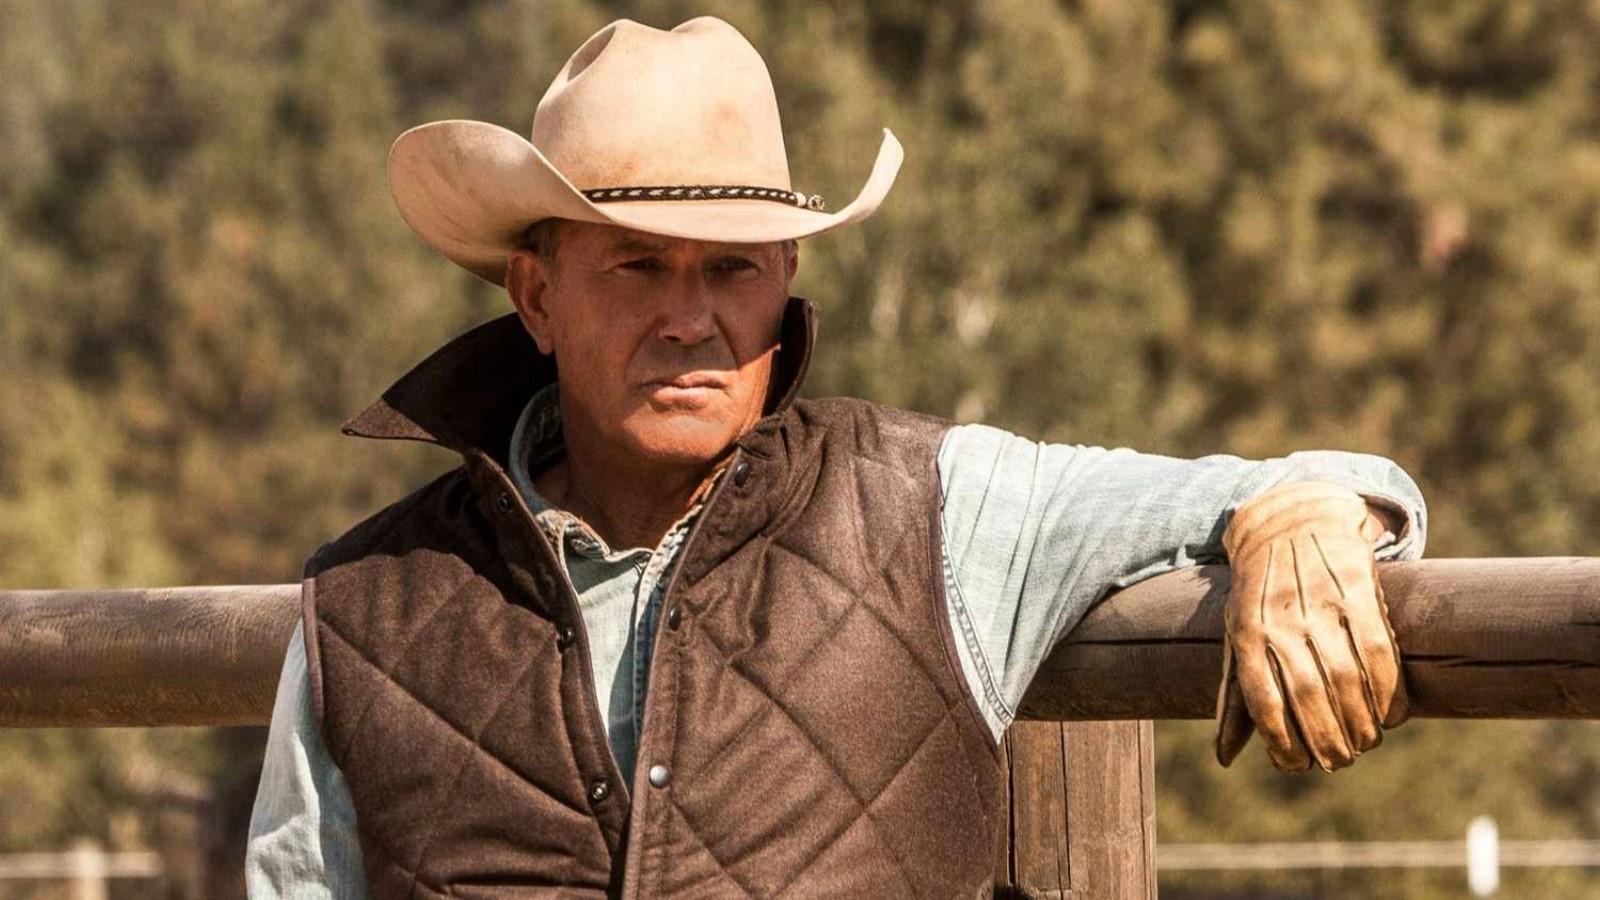 Yellowstone: Kevin Costner as John Dutton, standing outside leaning against a fence